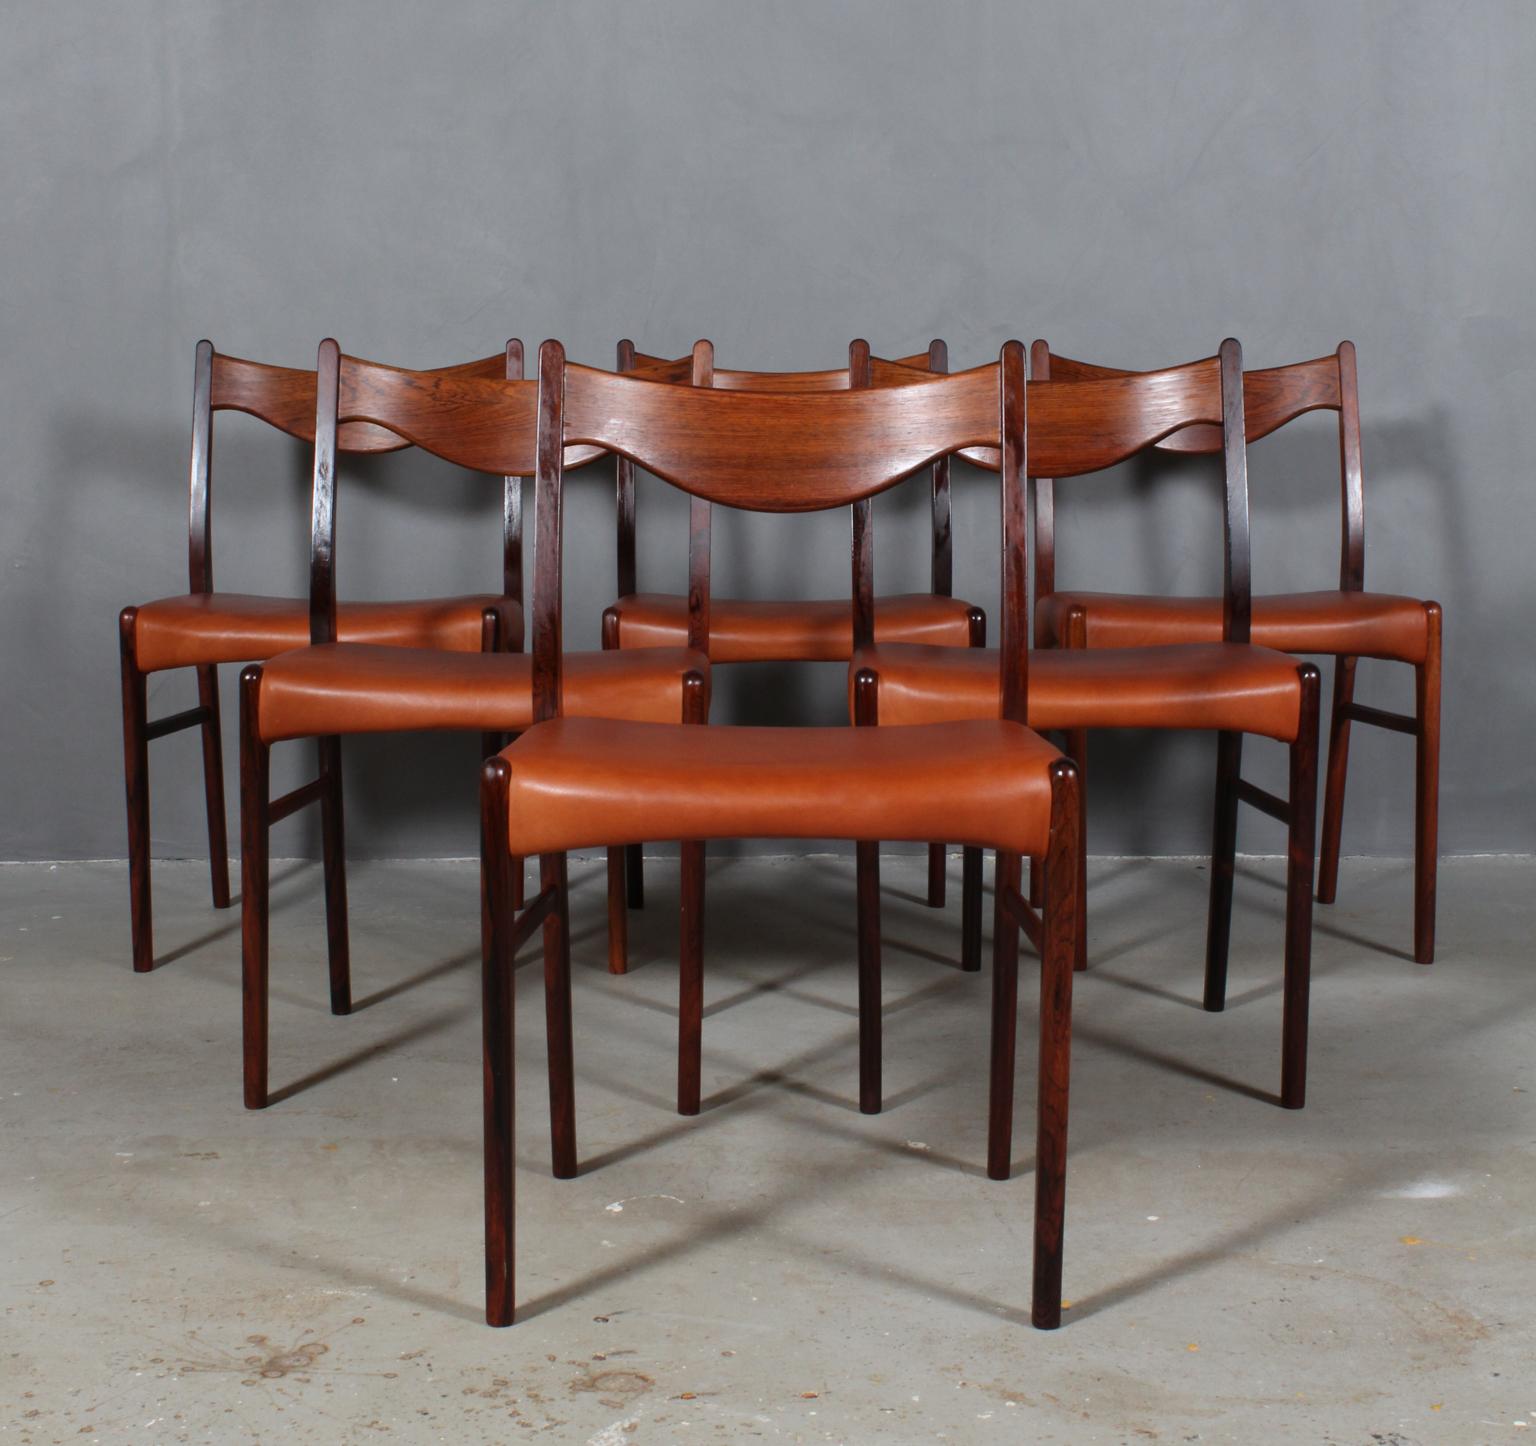 Six dining chairs designed by Arne Wahl, model GS61 for Glyngore Stolefabrik. 

Chairs crafted of solid Brazilian rosewood with new upholstered seats in cognac aniline leather.